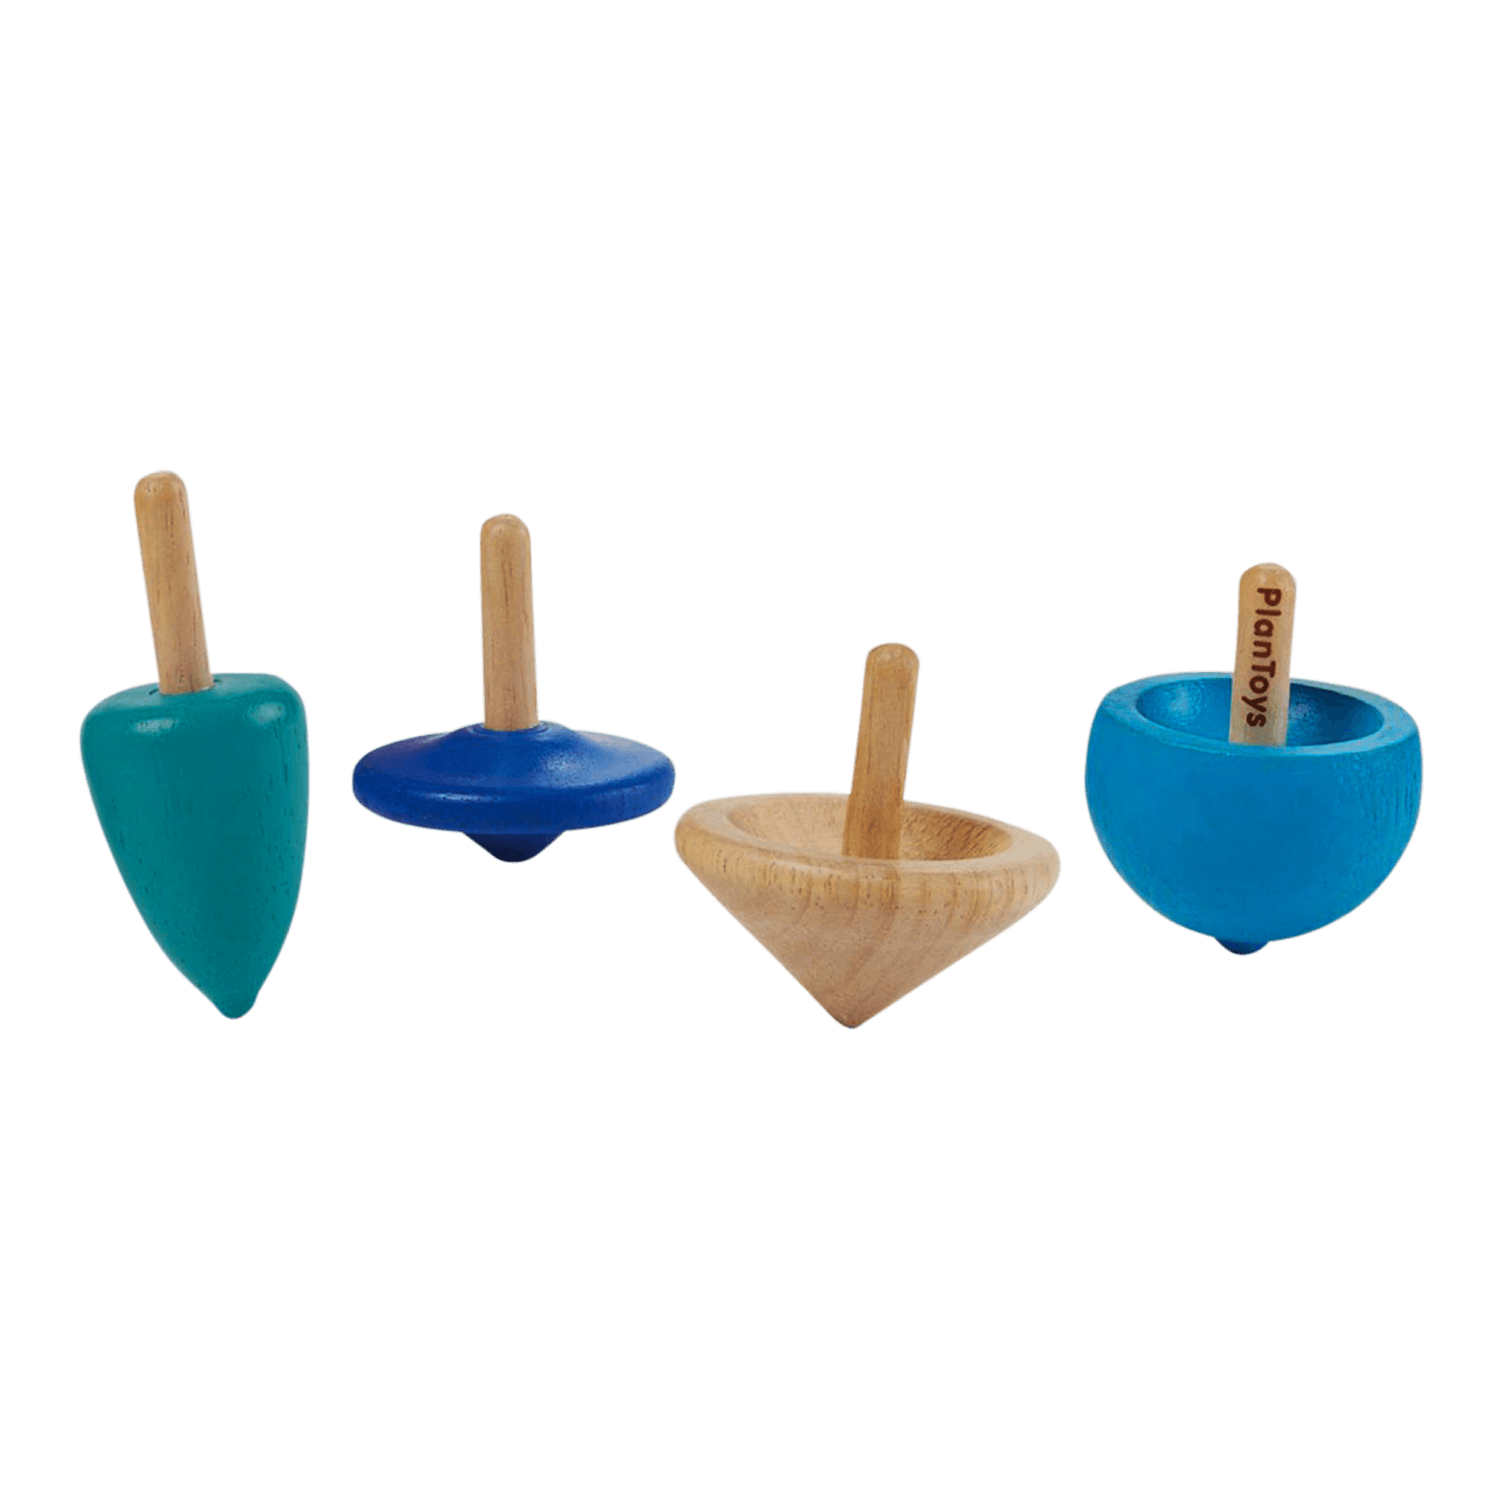 PlanToys Spinning Tops